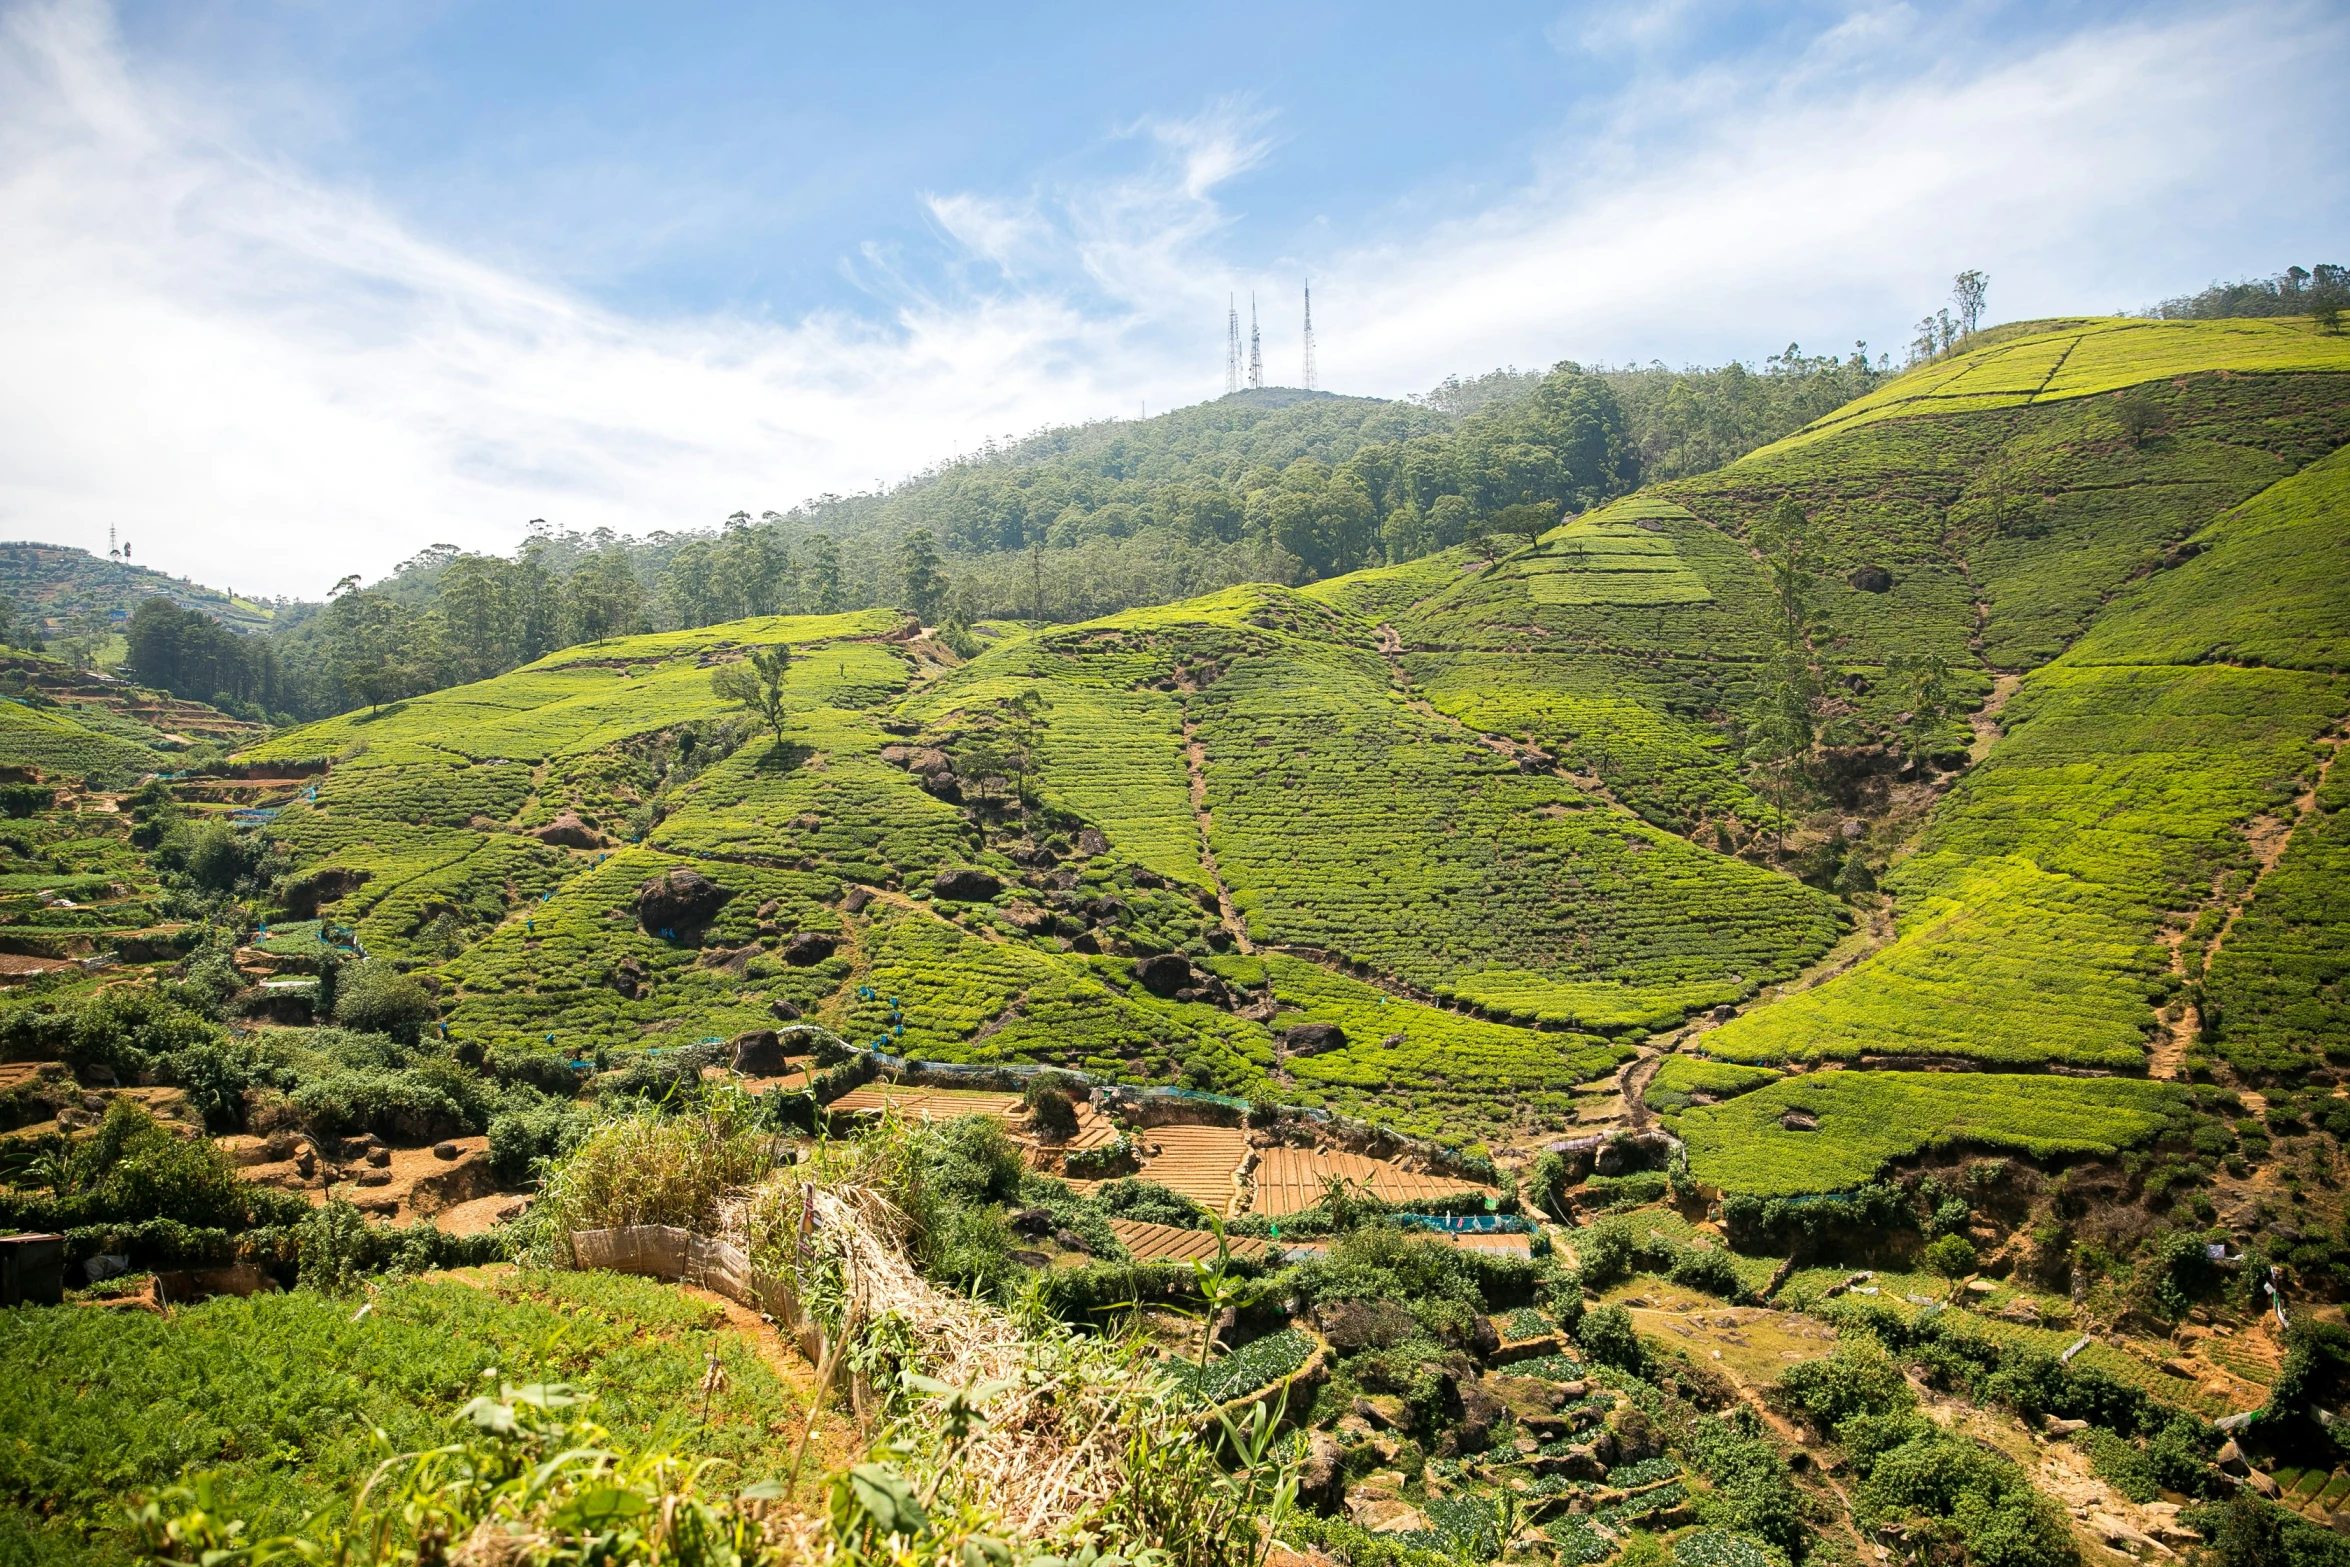 the green hillside has a winding road and tea plants growing in it